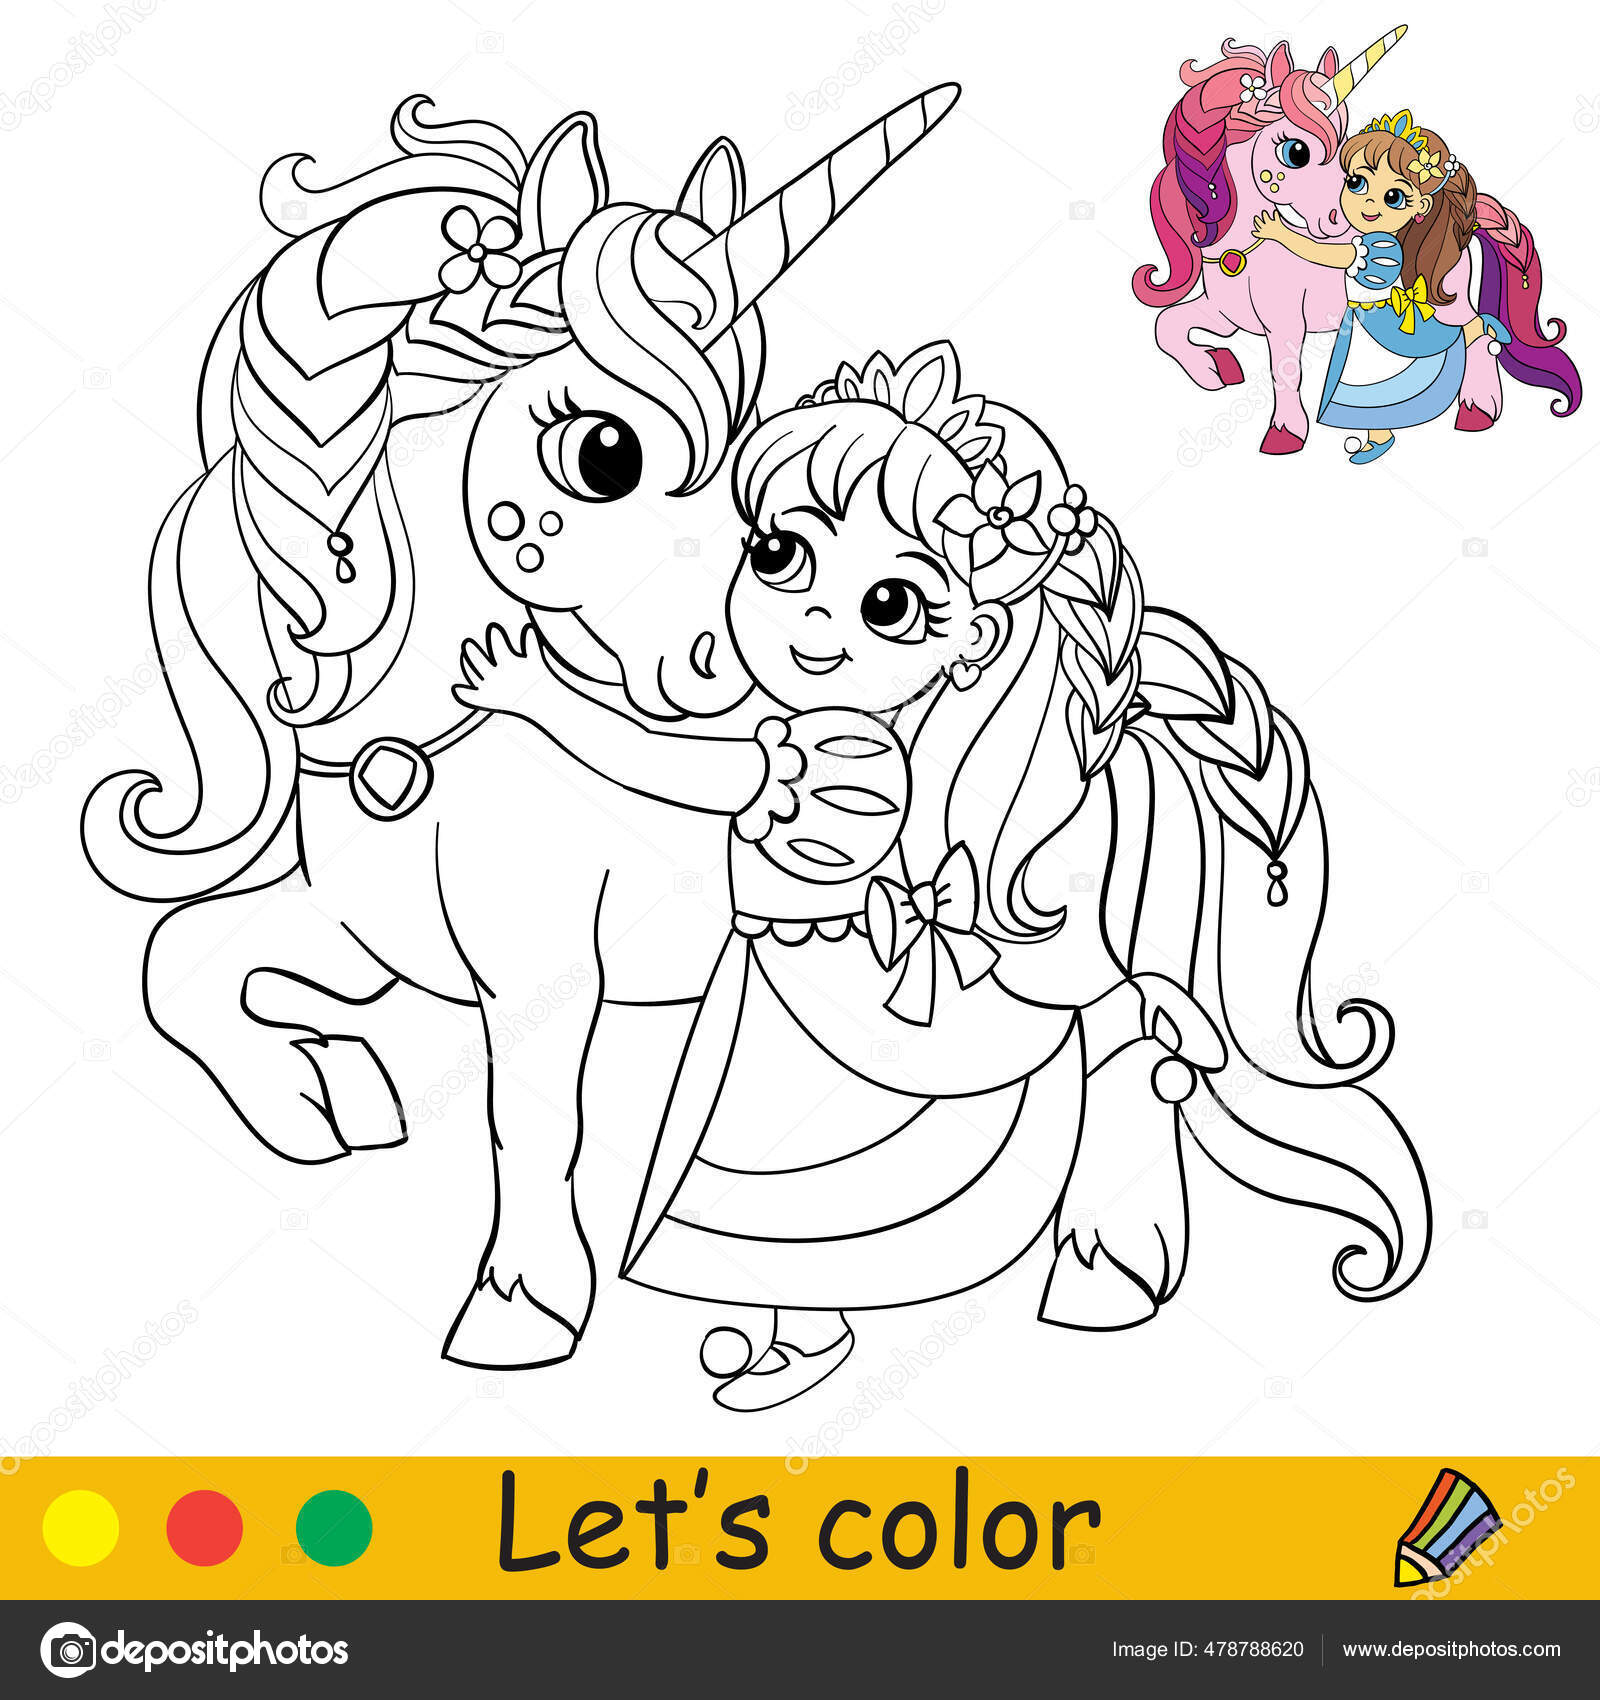 Cute little princess cuddles unicorn coloring book page colorful template stock vector by alinart